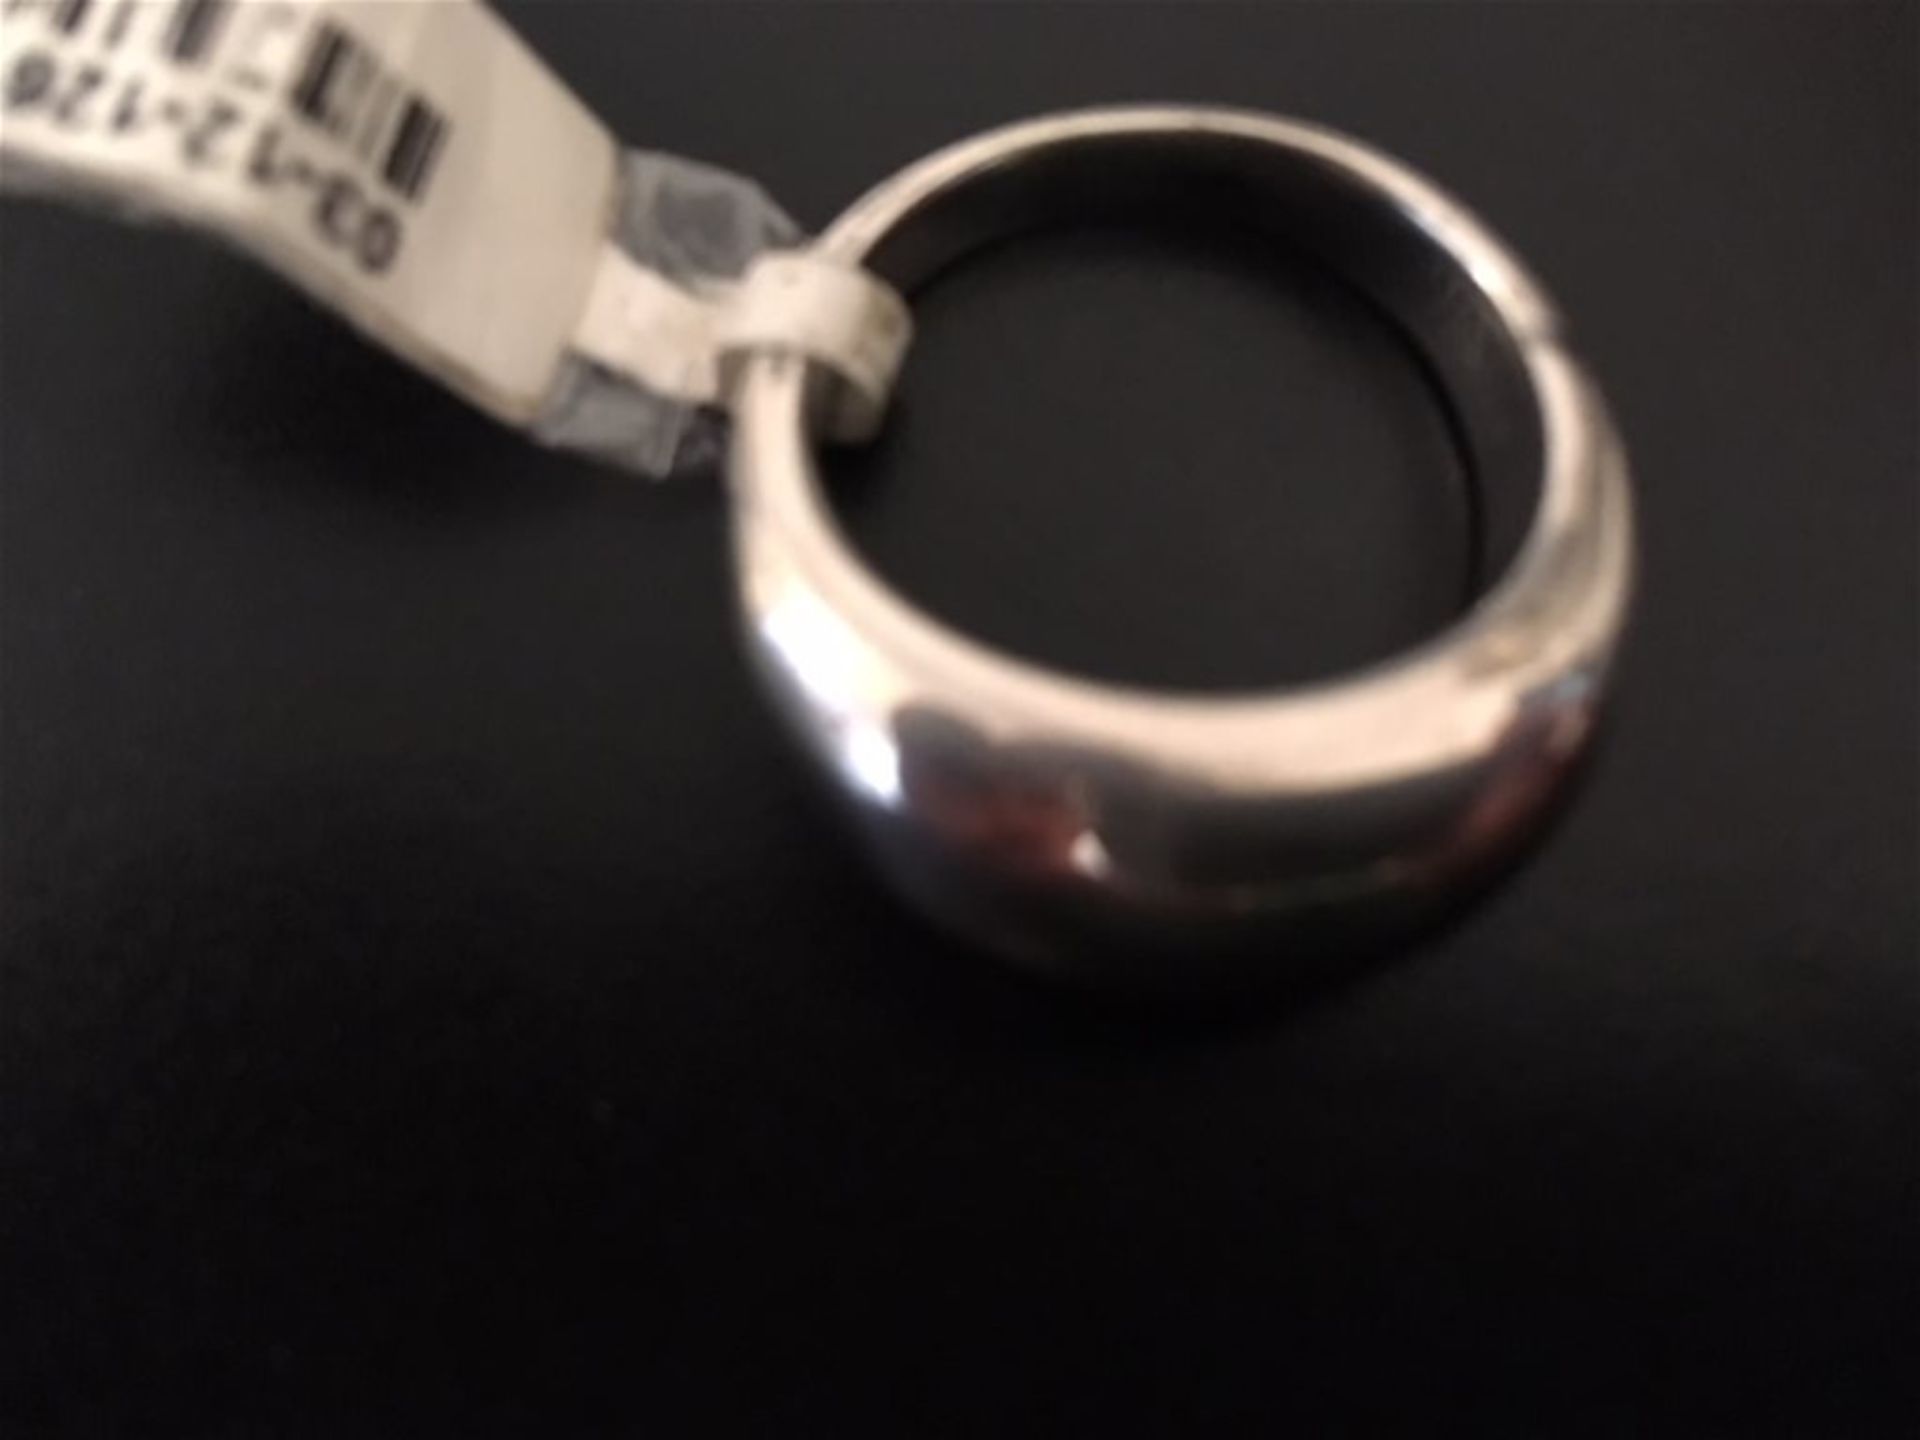 Silver plain ring - Image 2 of 2